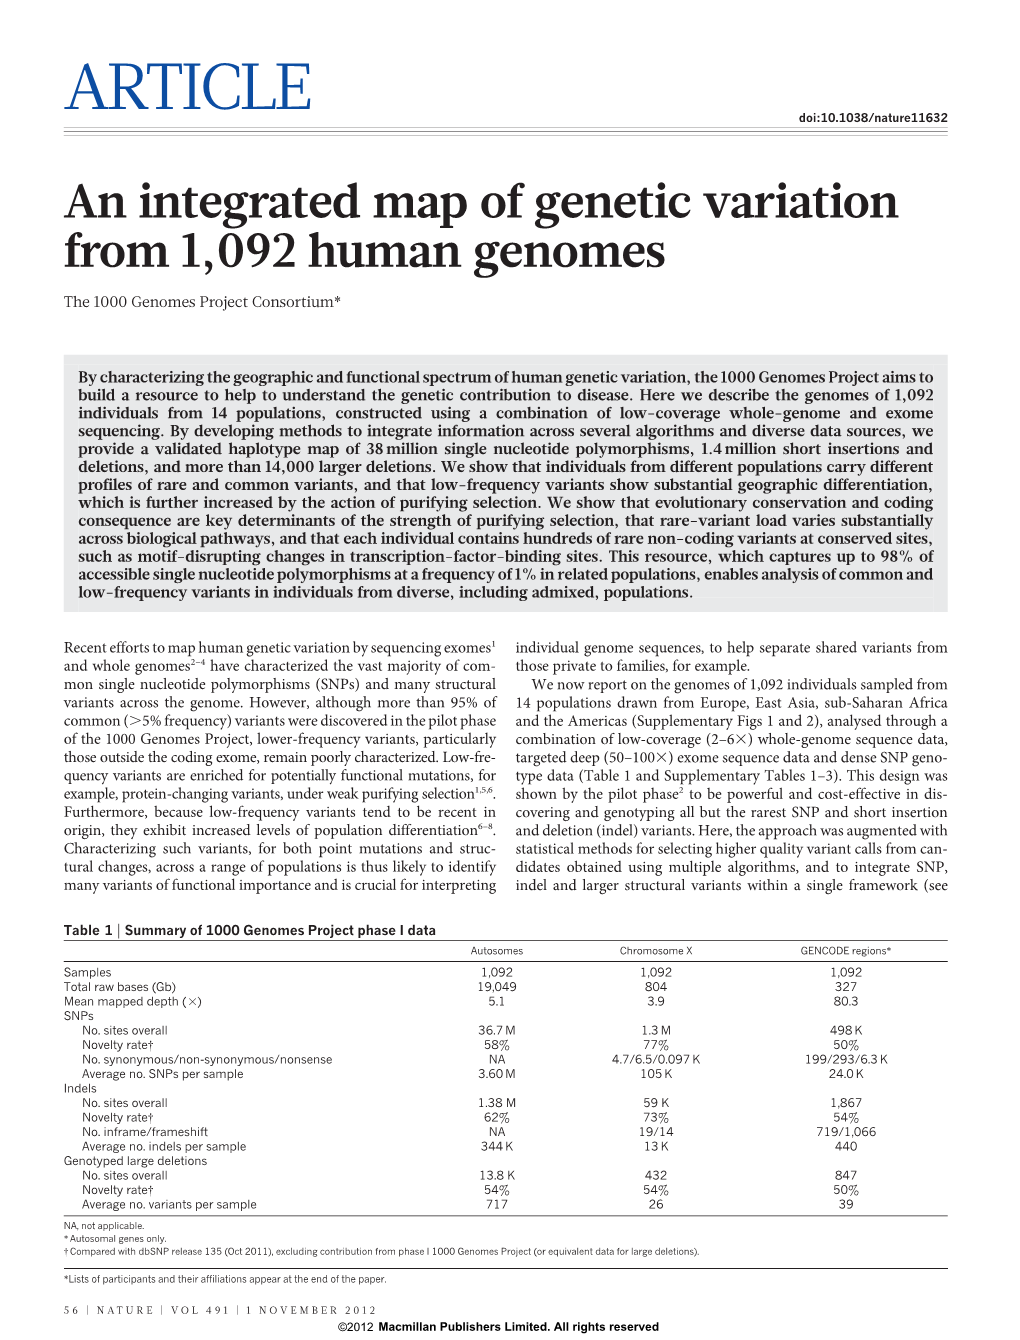 An Integrated Map of Genetic Variation from 1,092 Human Genomes